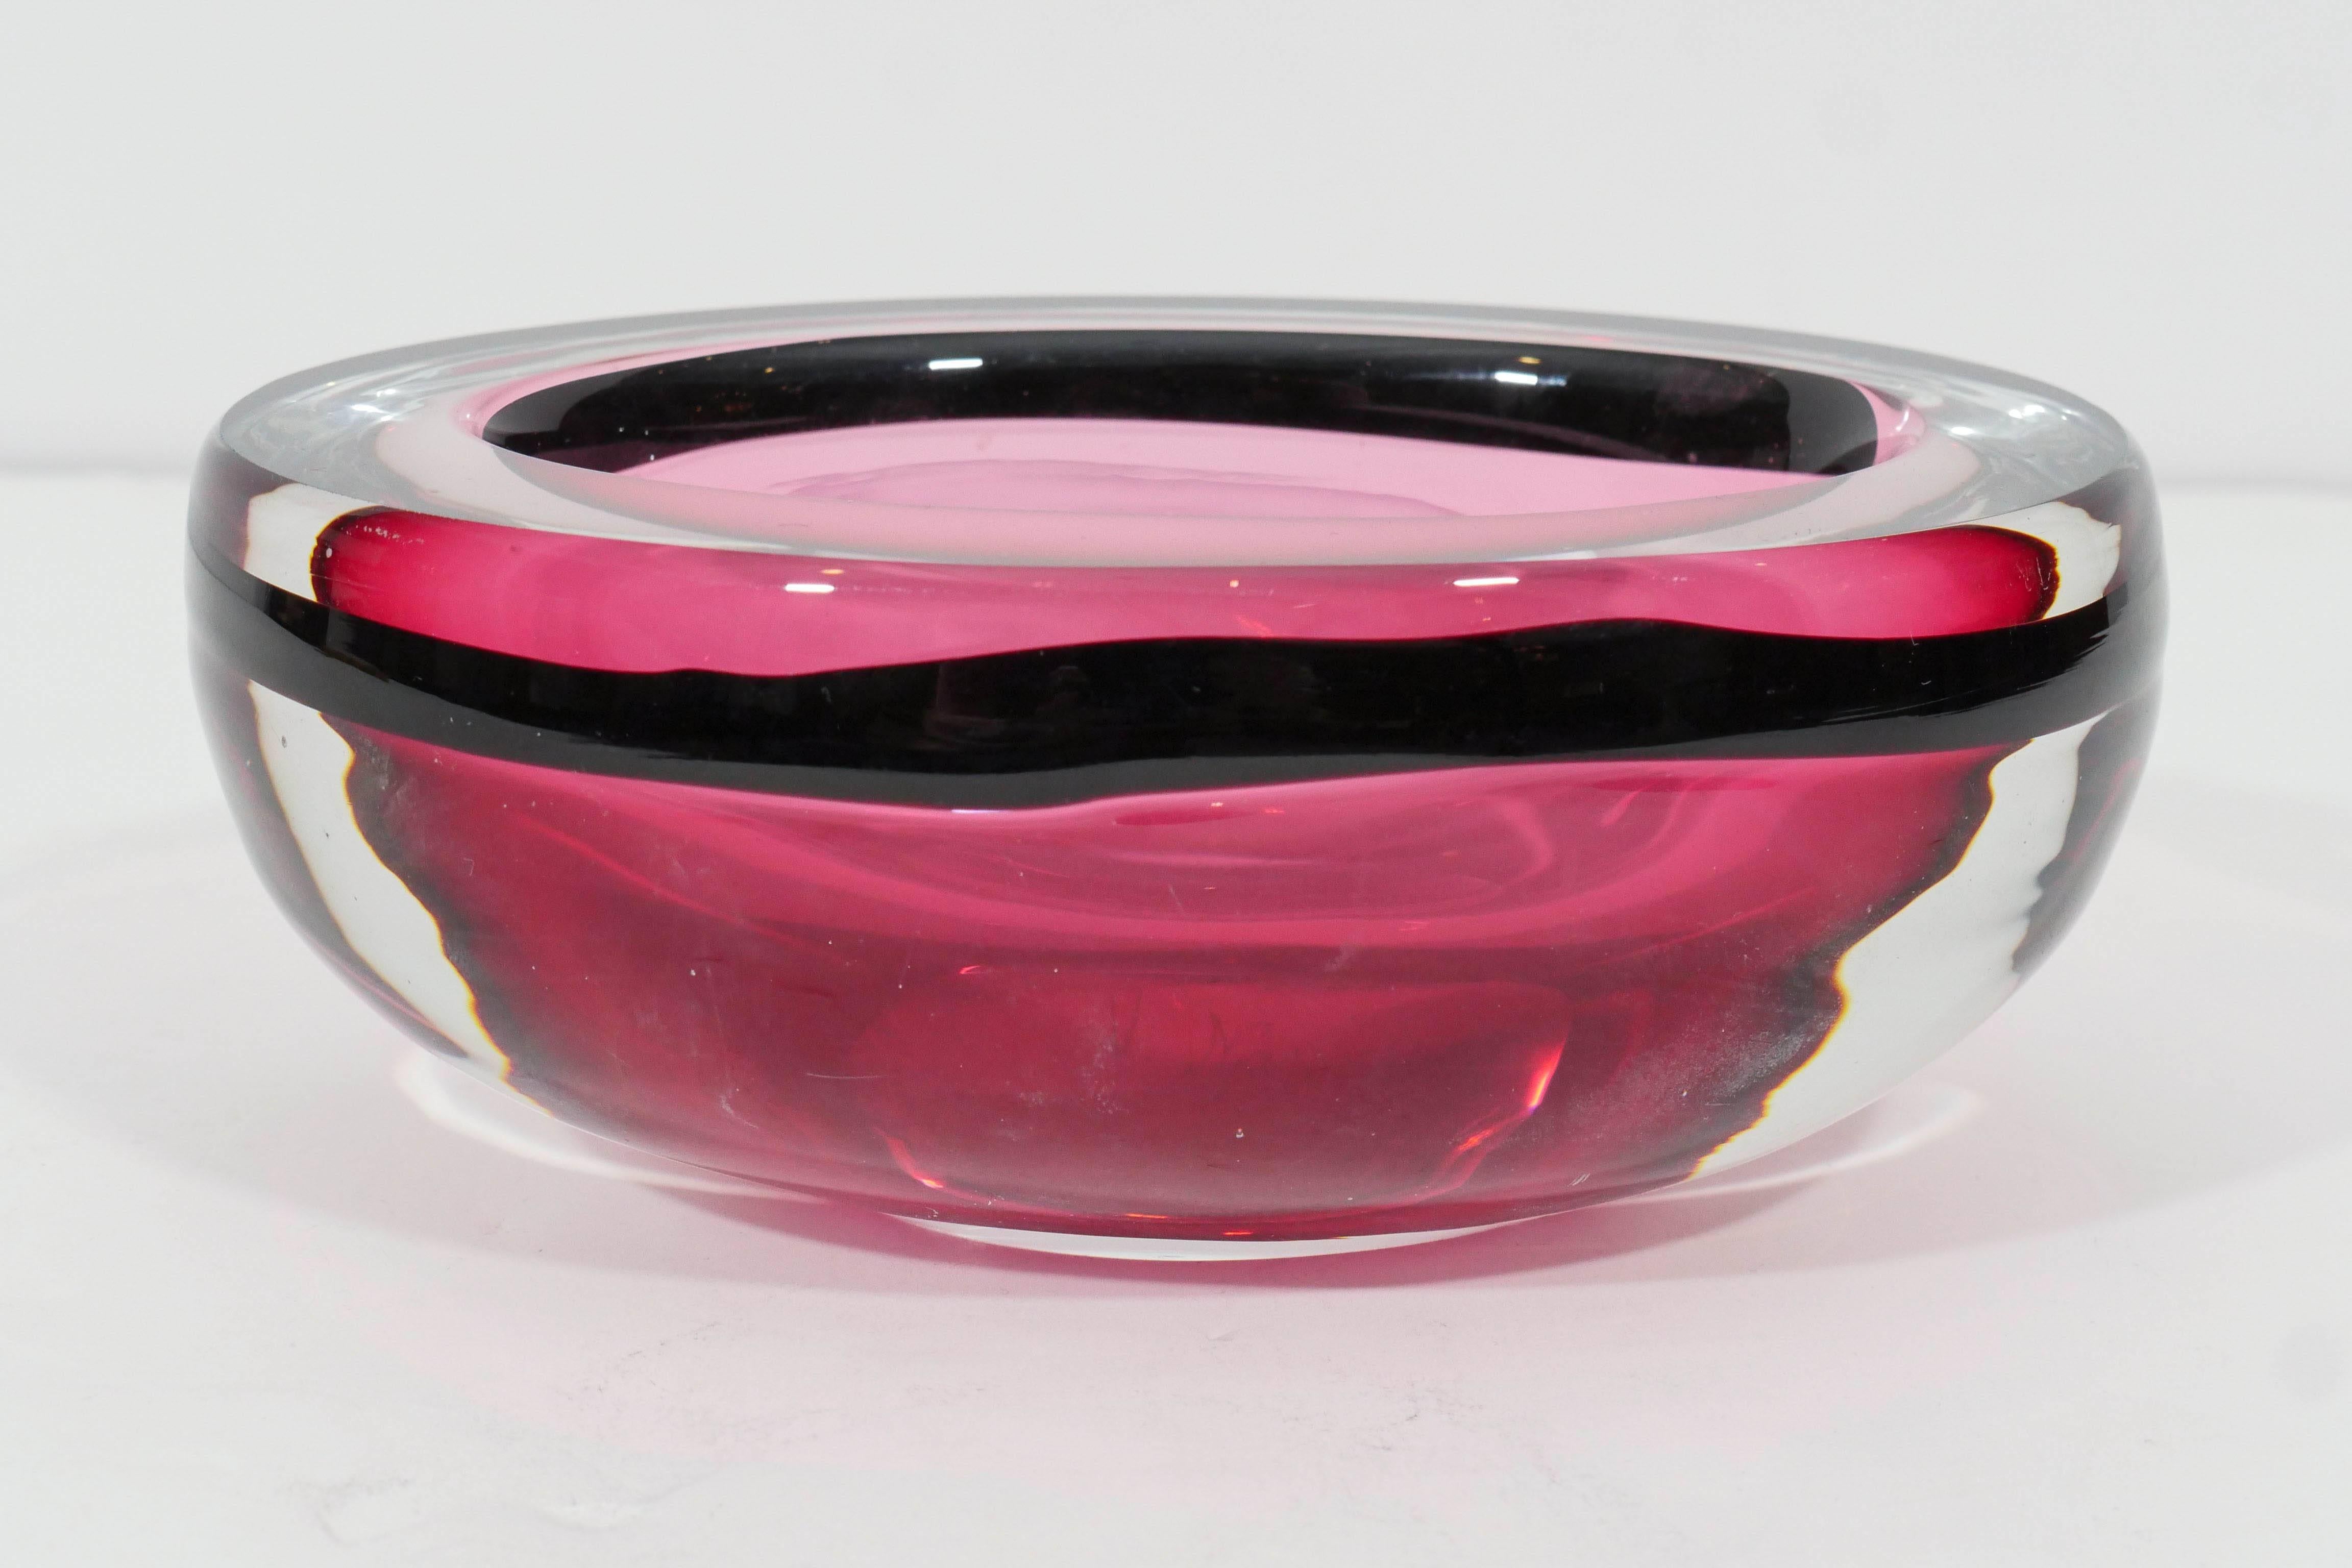 Clear Murano glass over rose in this heavy oval bowl. By Nason, Murano, signed on underside.